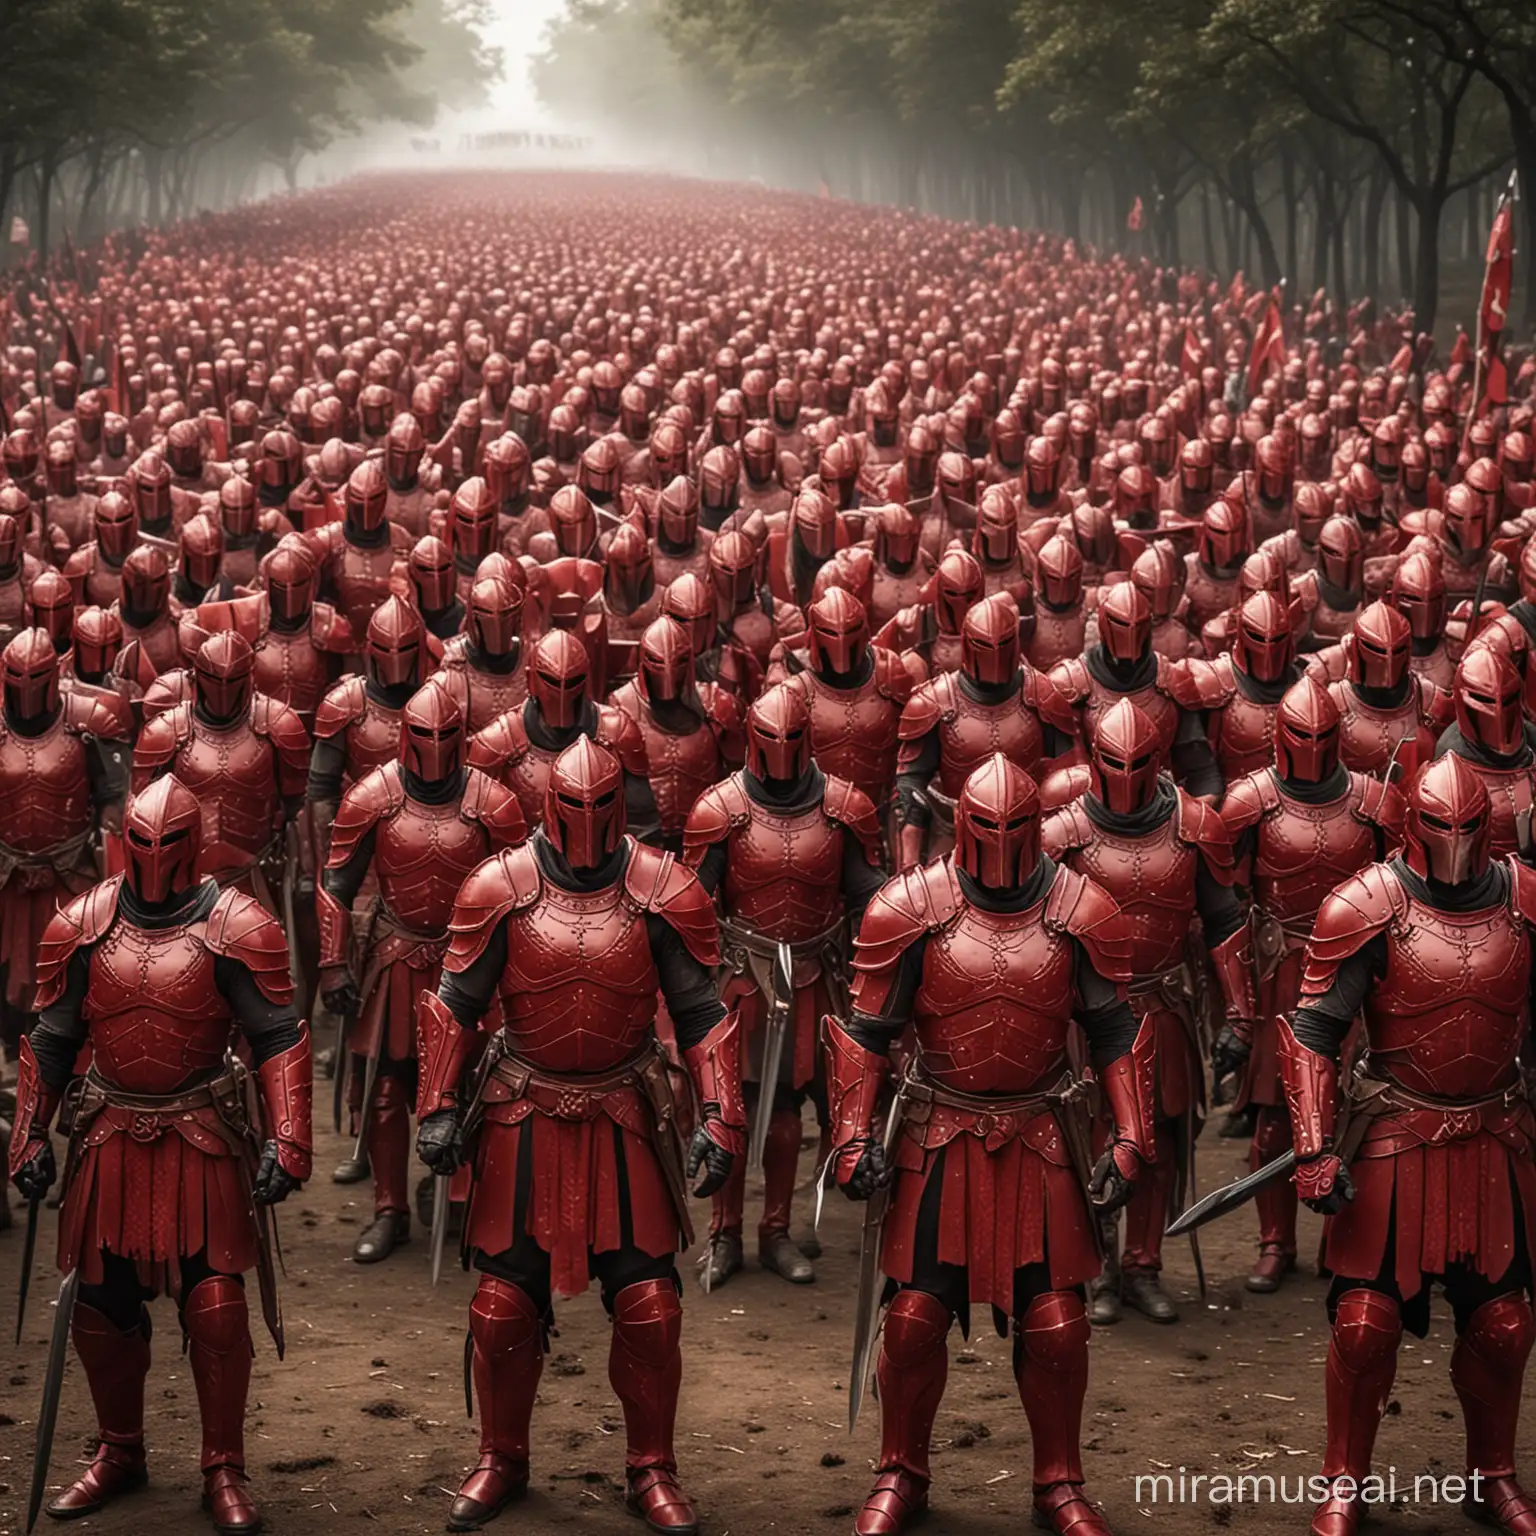 An entire army of these warriors in red armor.